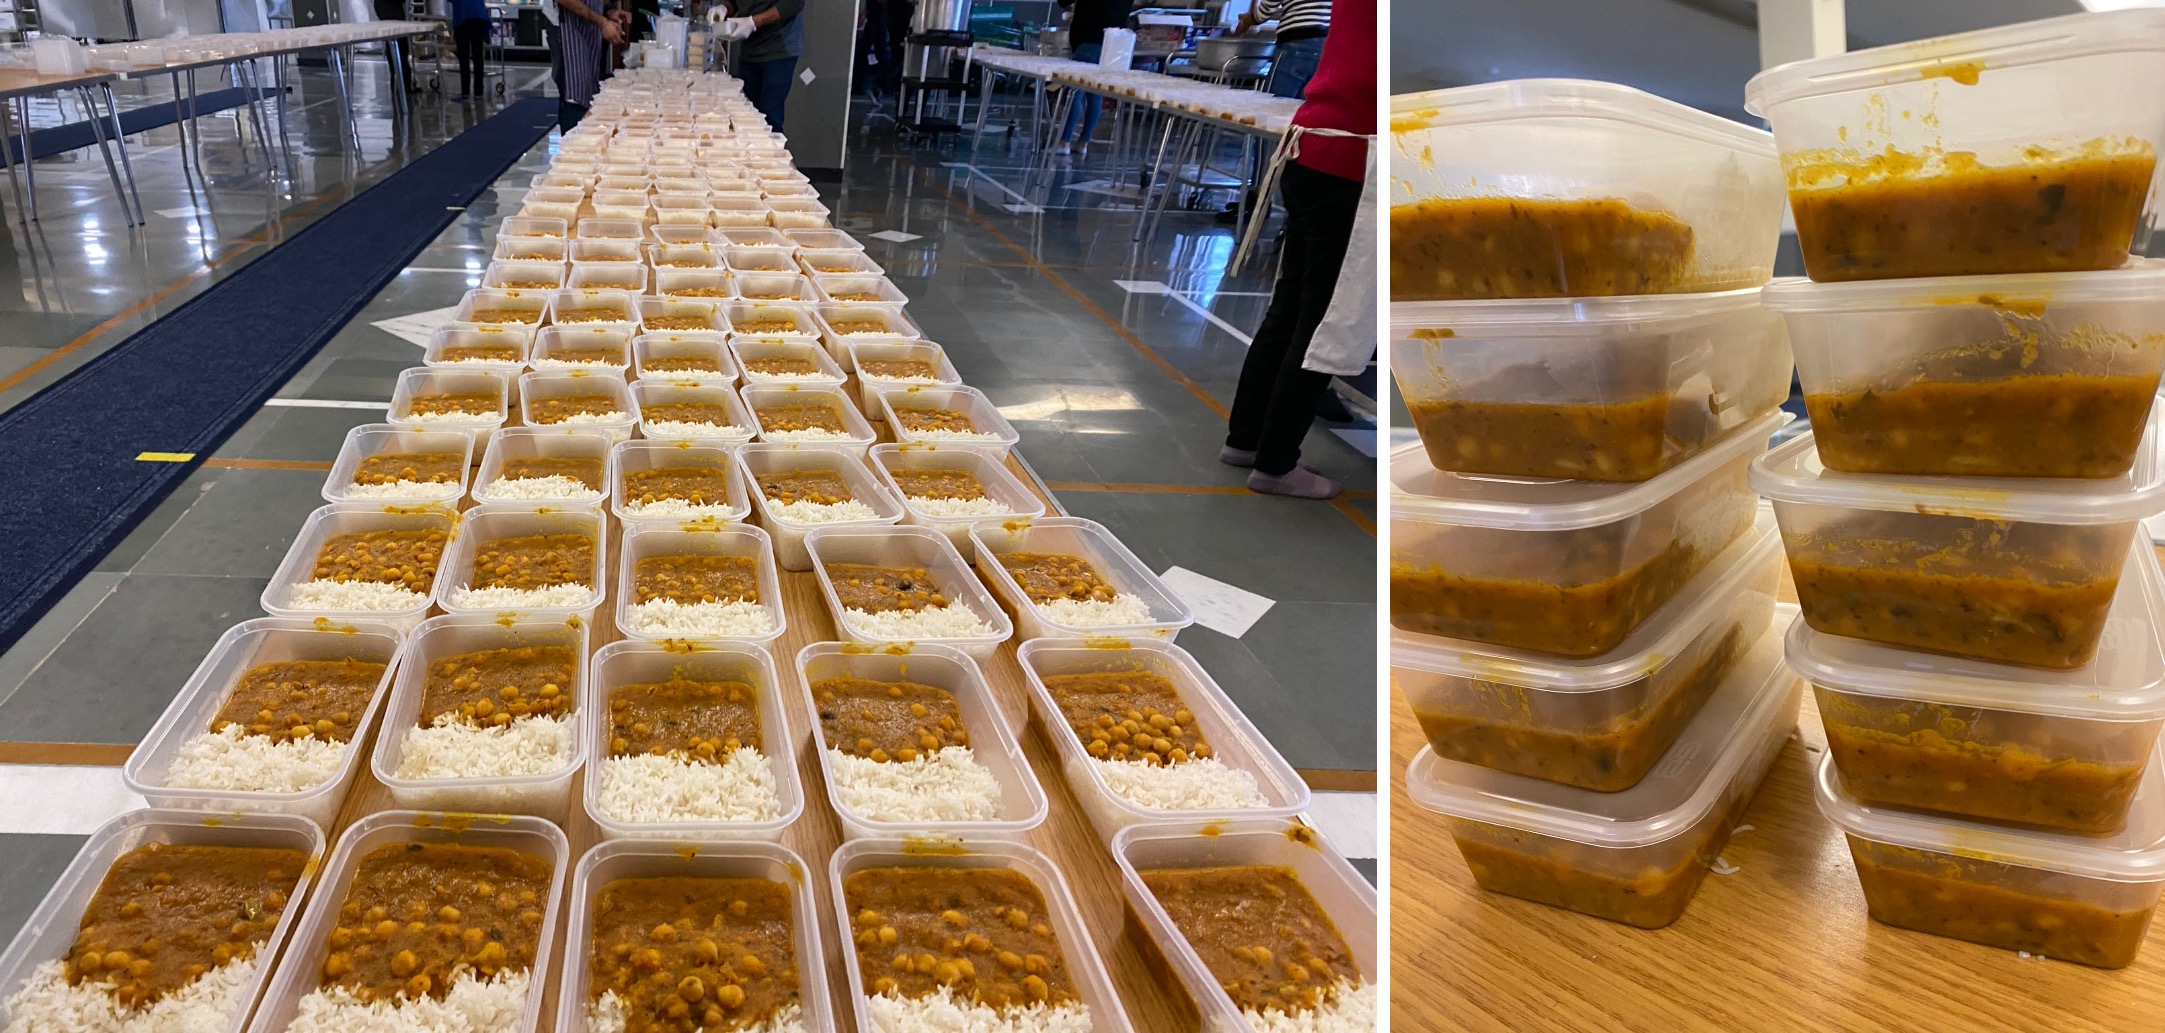 800 Hot meals ready for the truckers stranded in #Kent due to #OperationStack! Our thx to the #Kent Sikh community especially Guru Nanak Gurdwara Gravesend. for preparing meals on short notice #BordersClosed @Port_of_Dover